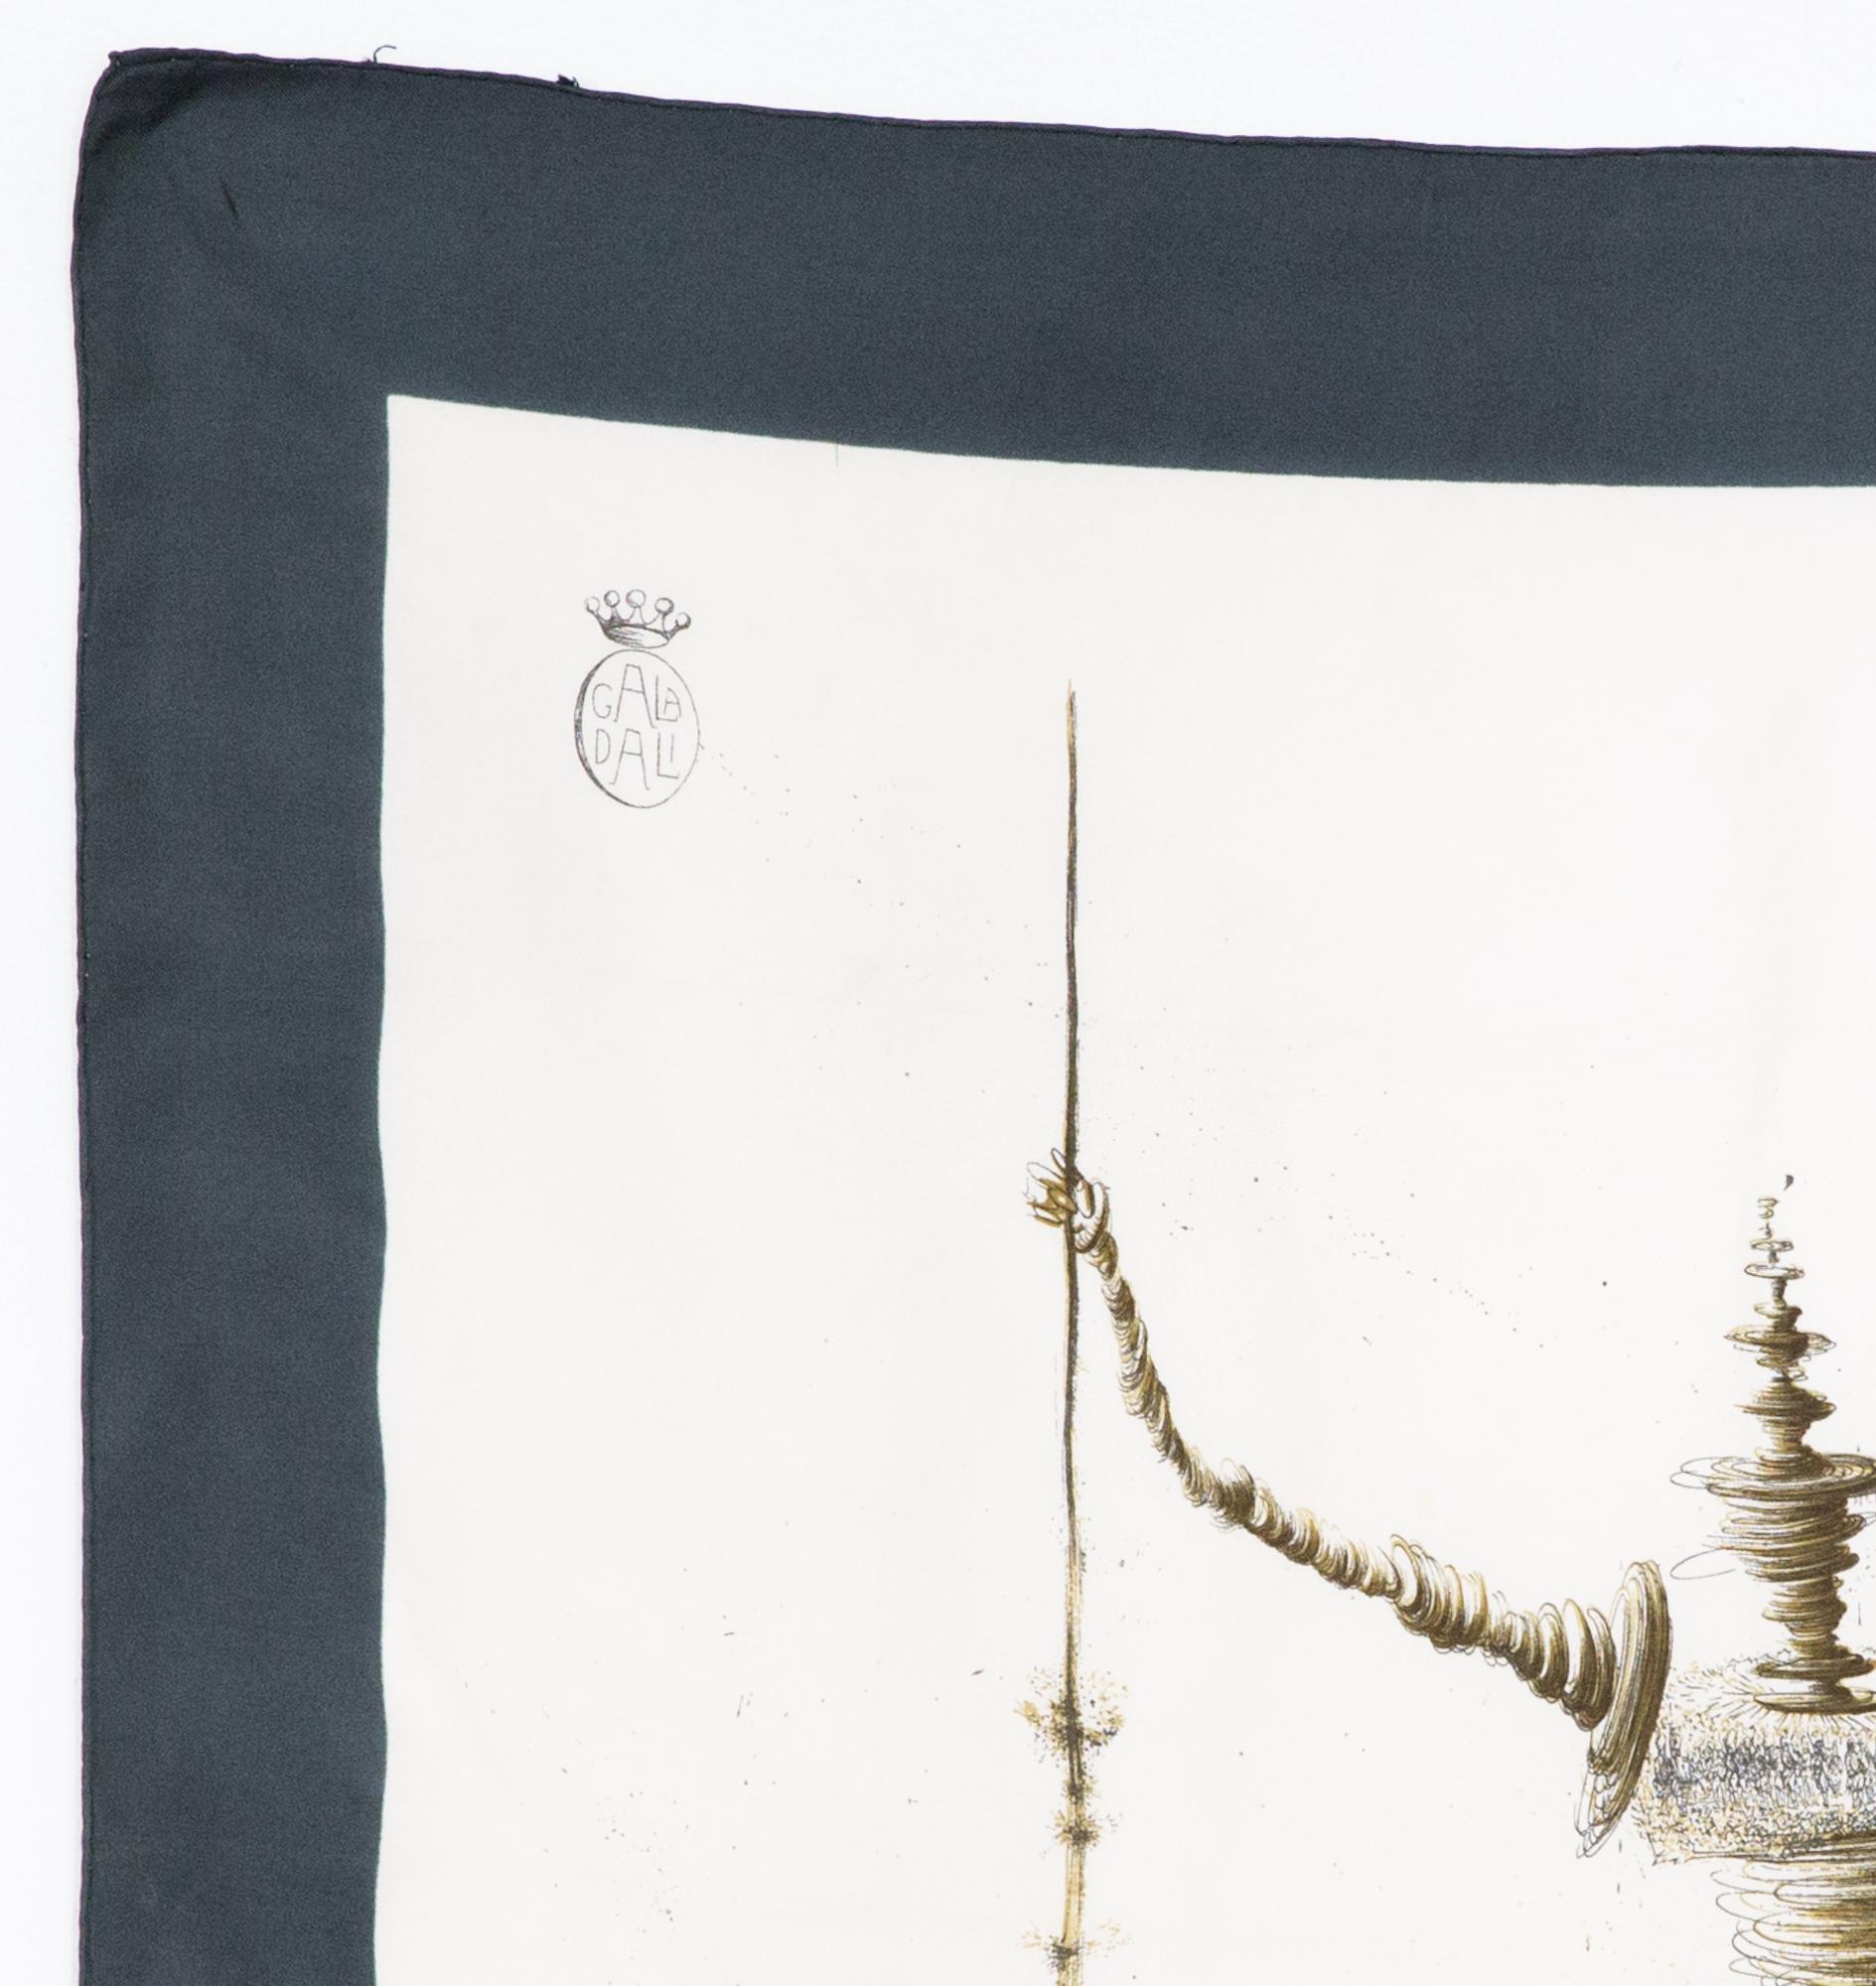 Salvador Dali Don Quichotte silk scarf featuring a Gala and a Dali signature. 
Circa 1985
In good vintage condition. Made in France.
29.5in. (75cm)  X 29.5in. (75cm)
We guarantee you will receive this  iconic item as described and showed on